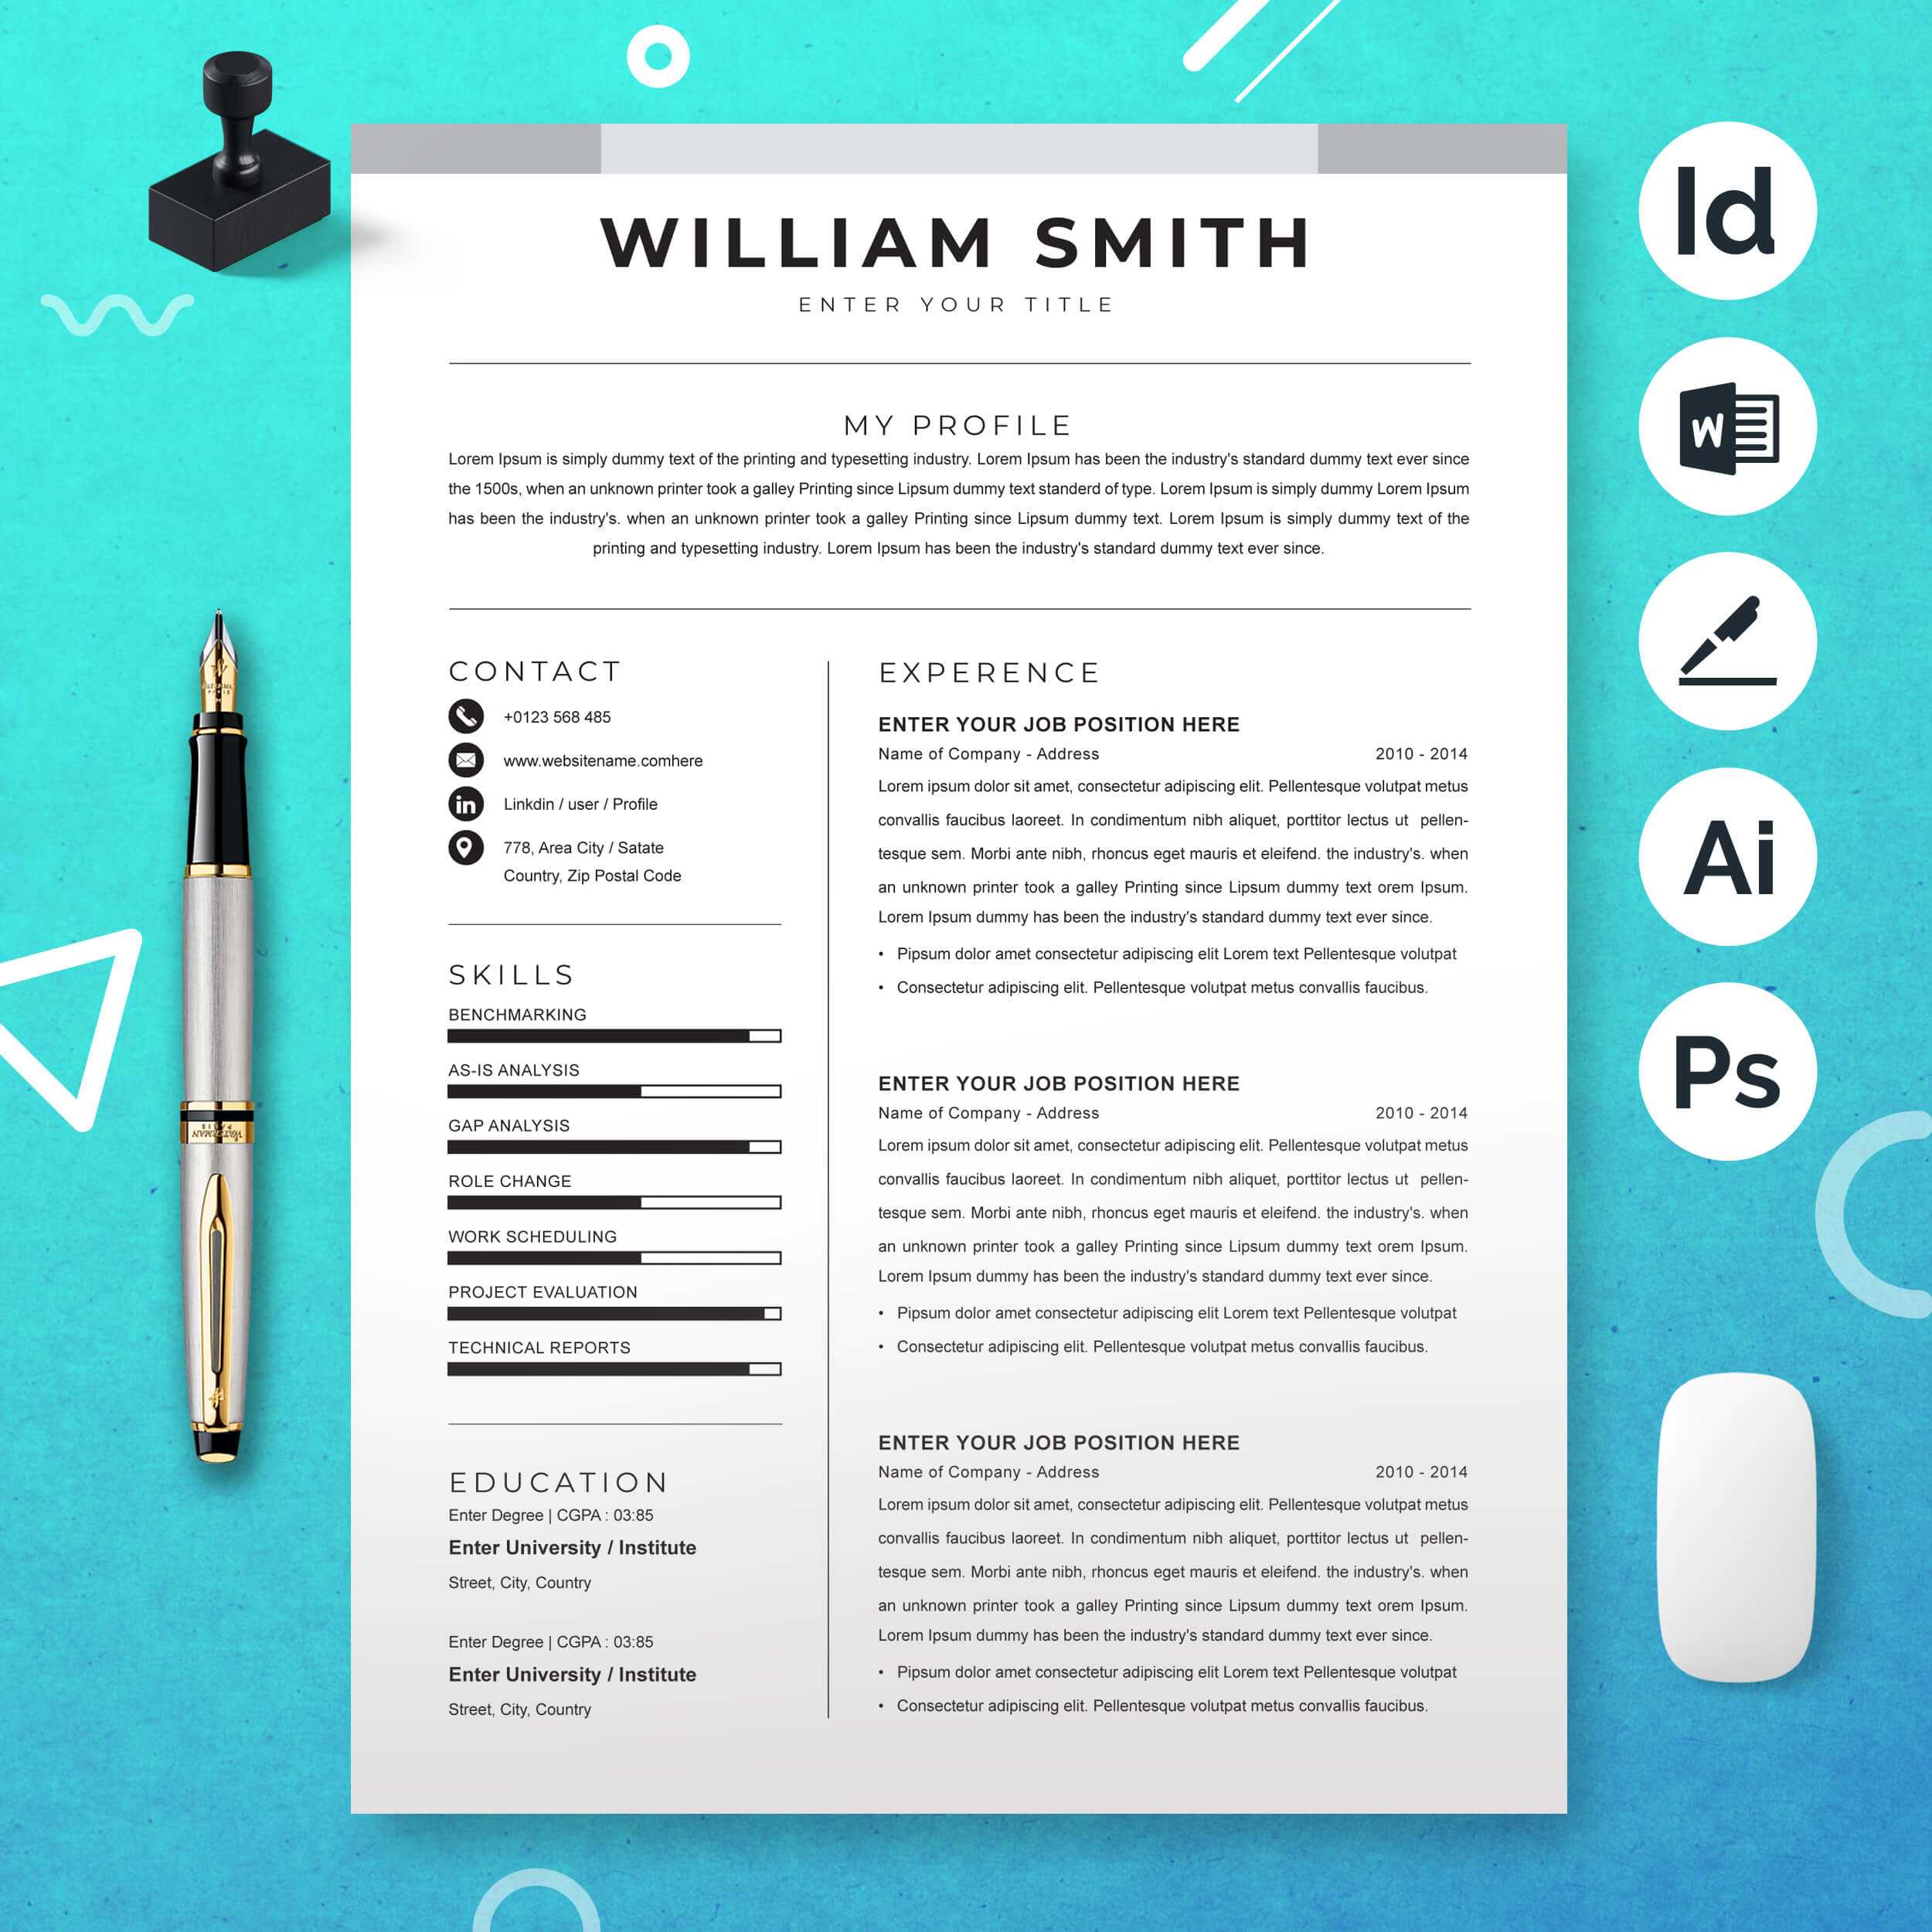 Modern Resume Template | Resume Template With Cover Letter cover image.